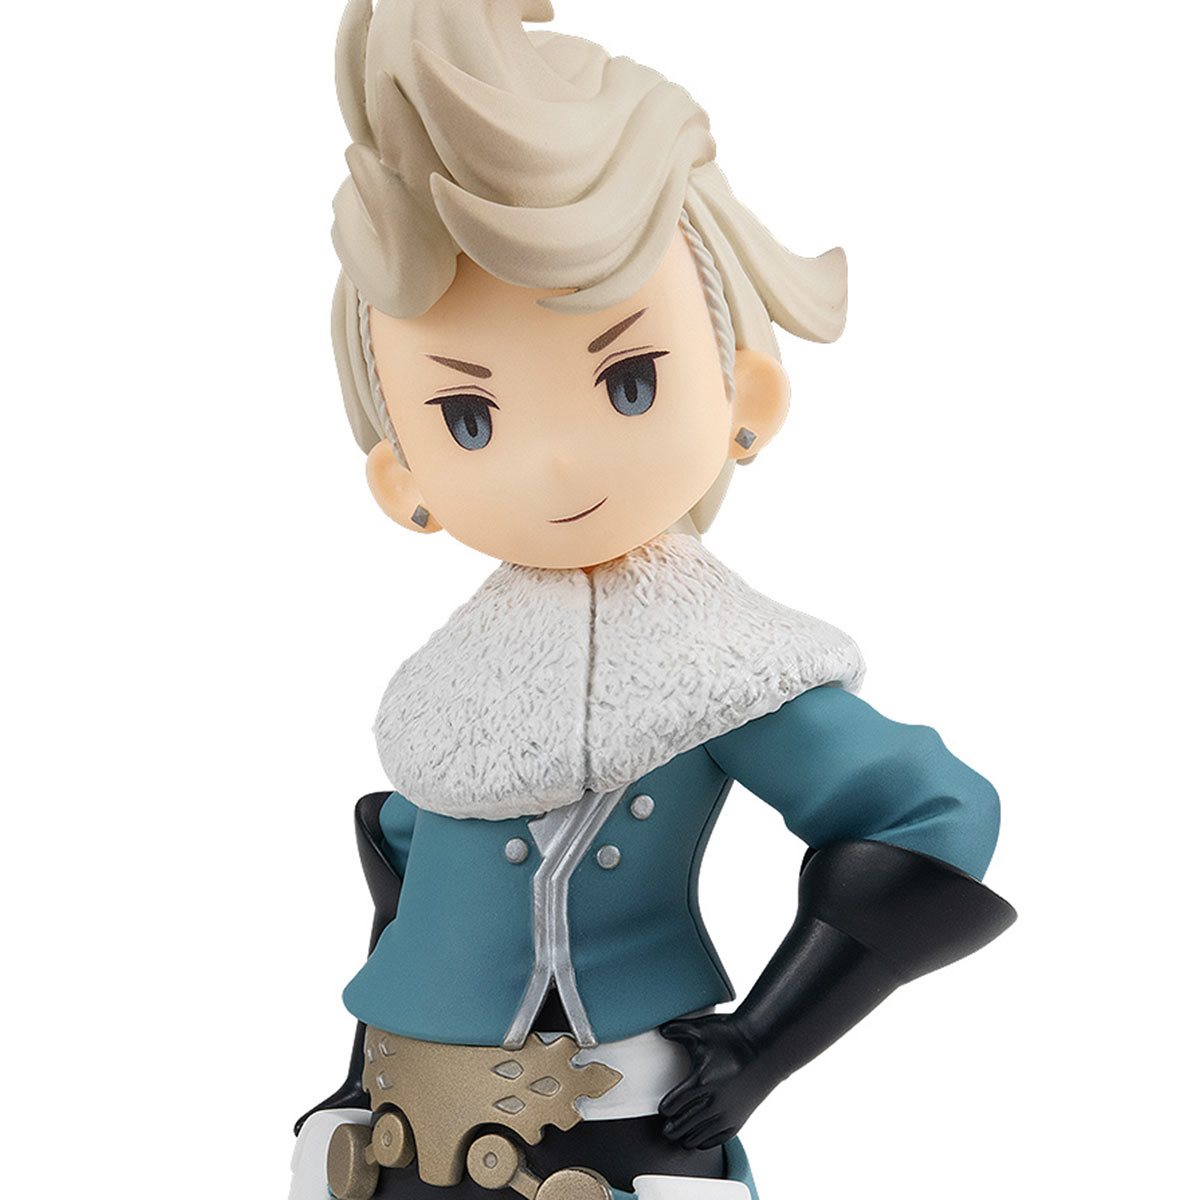 Ringabel and Edea are so cute! 🥹 Fans of Bravely Default & Bravely Second  will love these little Pop-Up Parade figures! #bravelydefa